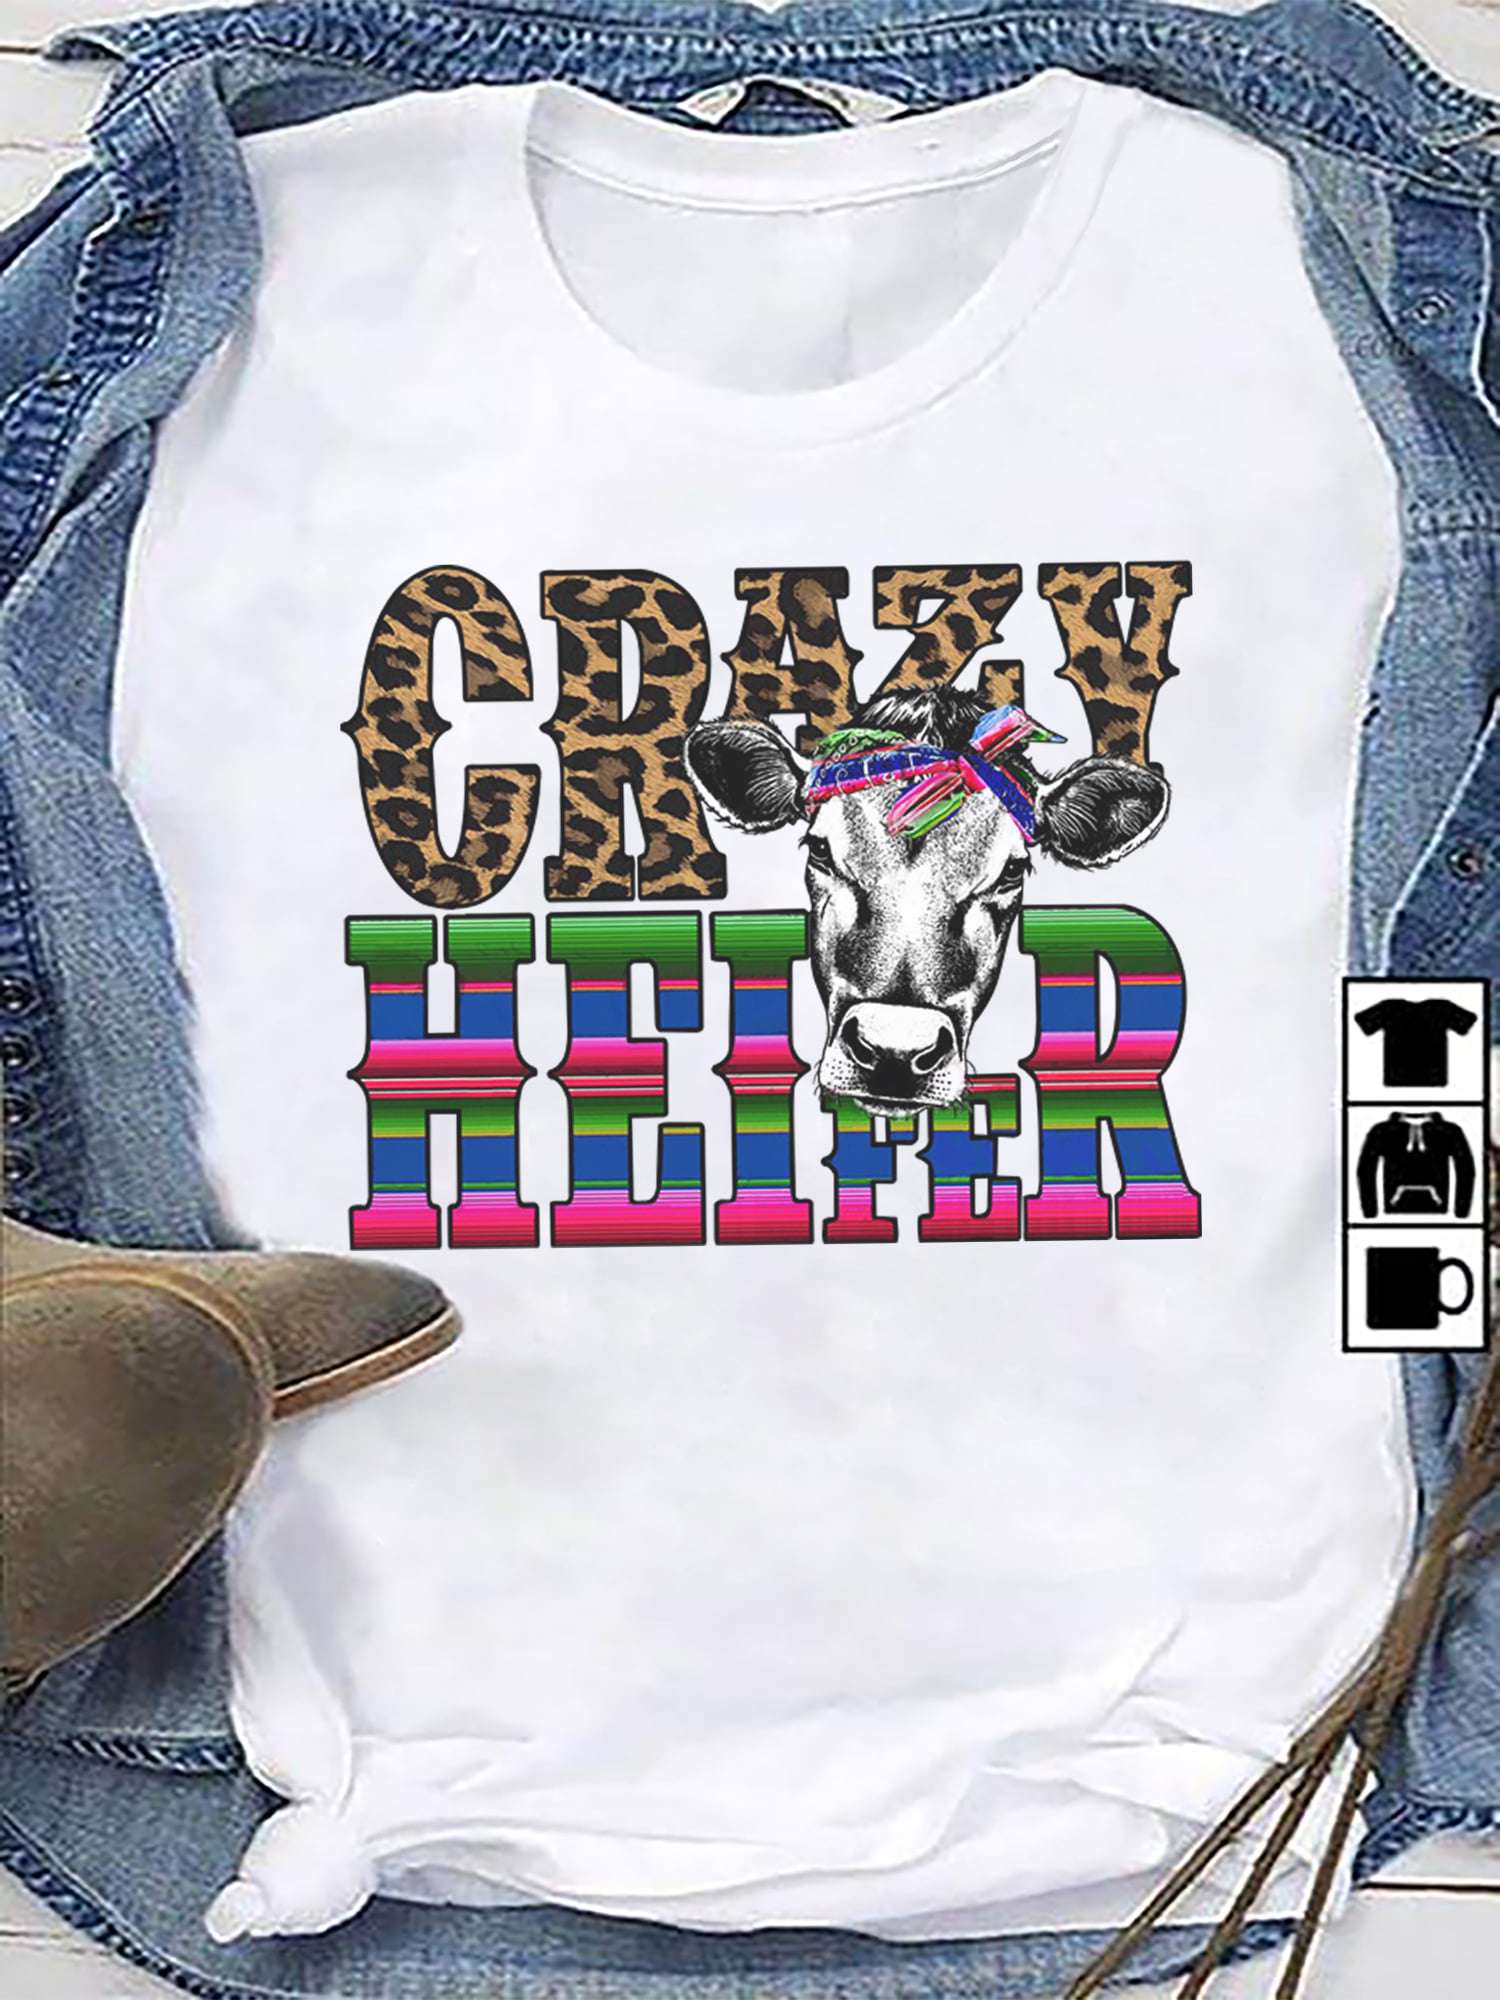 Crazy Heifer - Funny cow graphic T-shirt, gift for cow lover